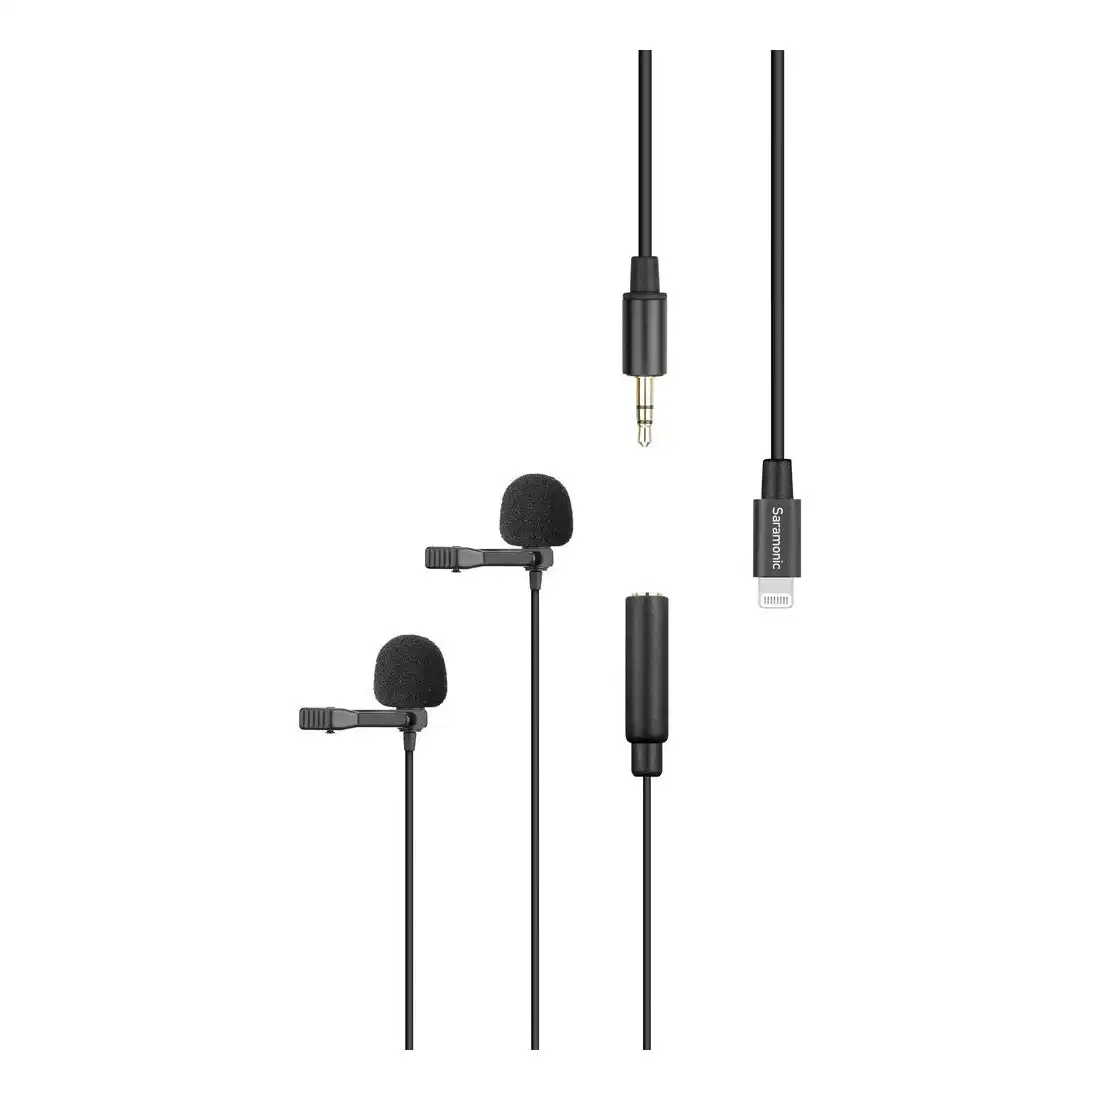 Saramonic LavMicro U1C Dual Omnidirectional Lavalier Microphone with Lightning Connector for iOS Devices (6m)